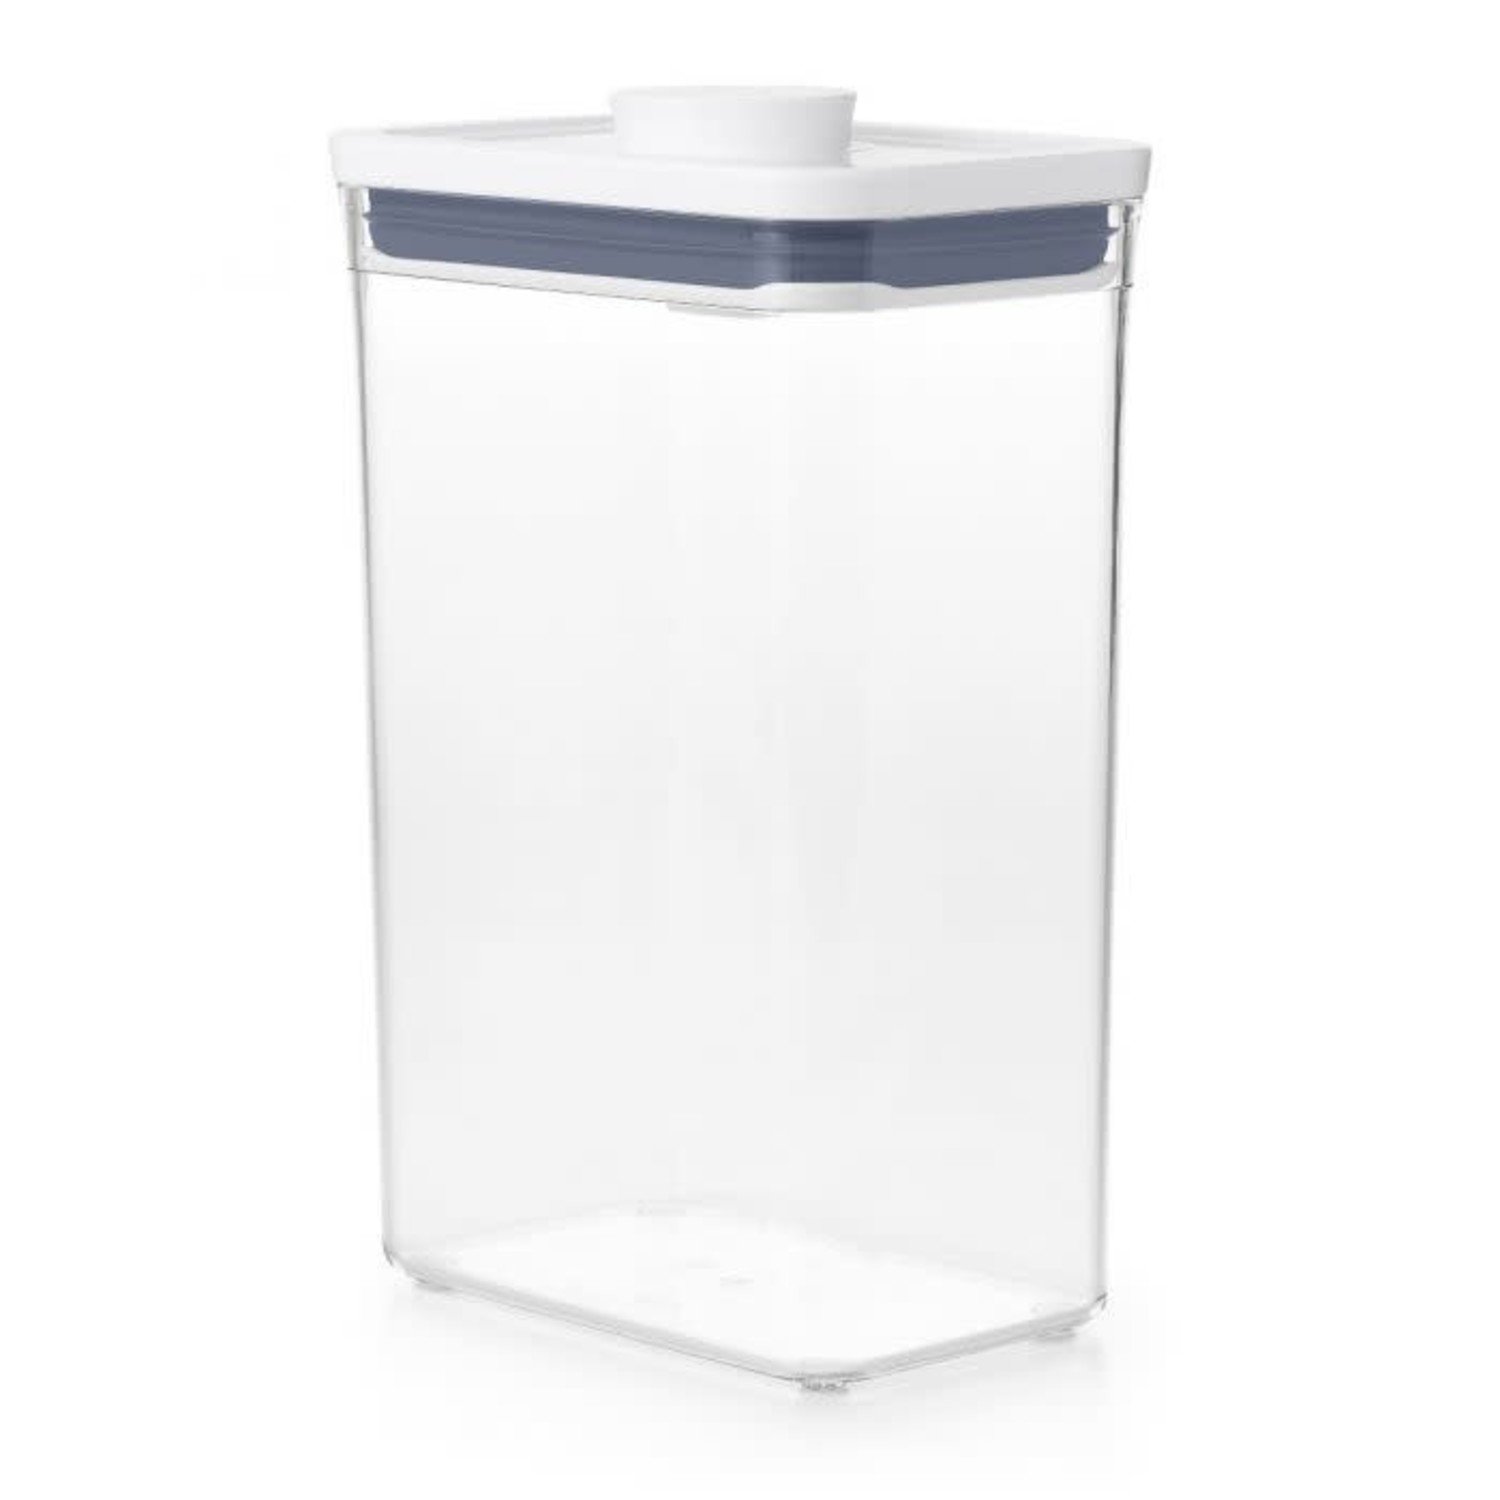 OXO OXO Pop 2.6 liter Rectangle Storage Container